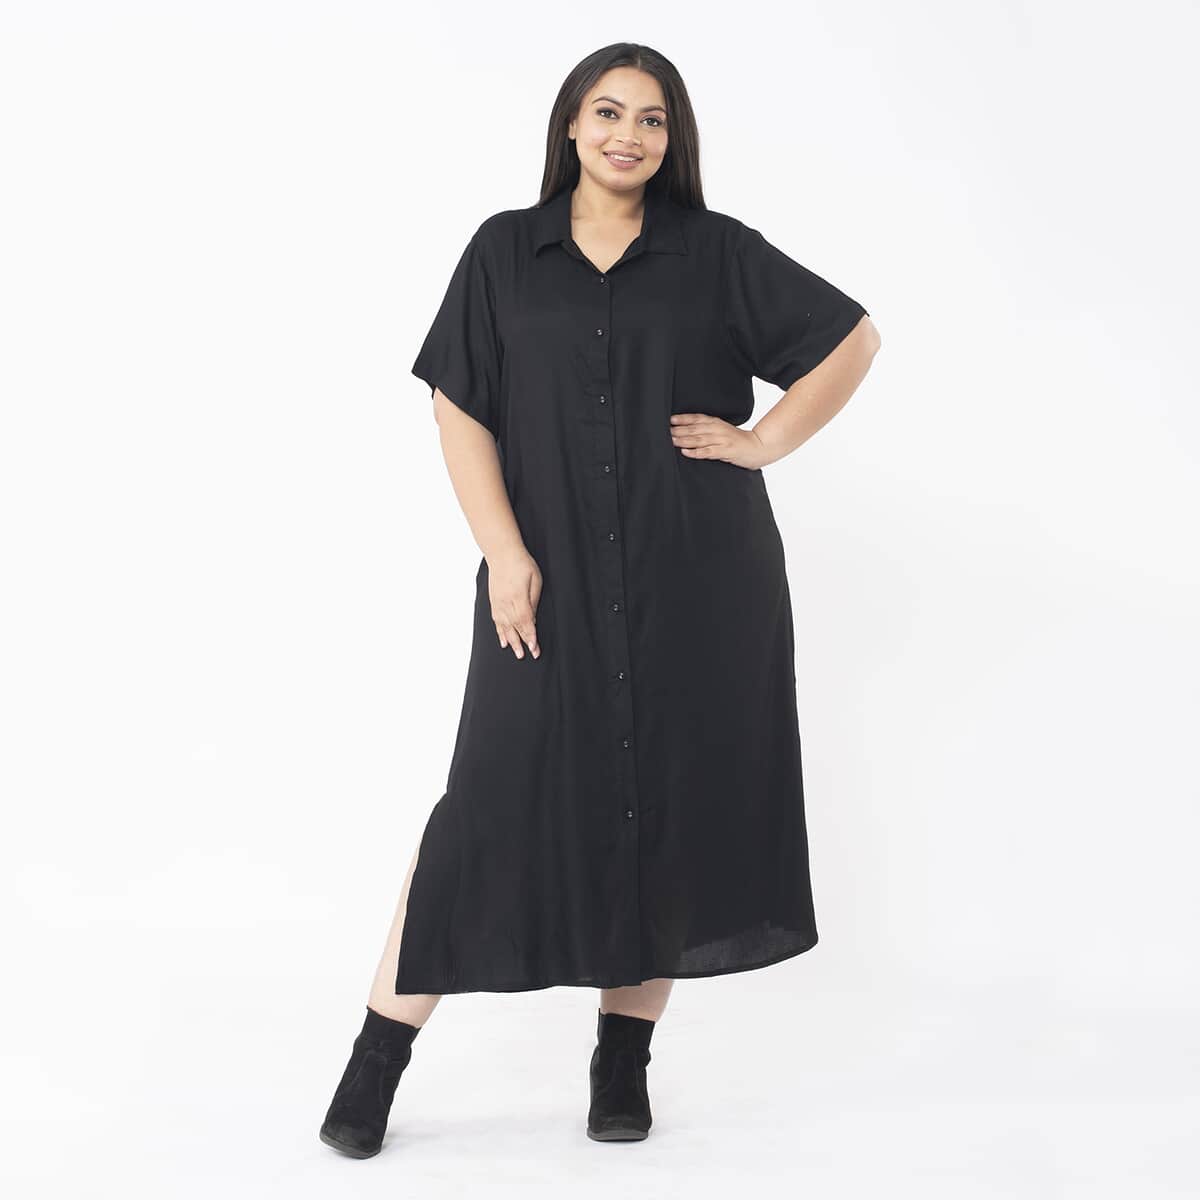 Tamsy Black Collar Dress with 3/4 Sleeve -S/M image number 0